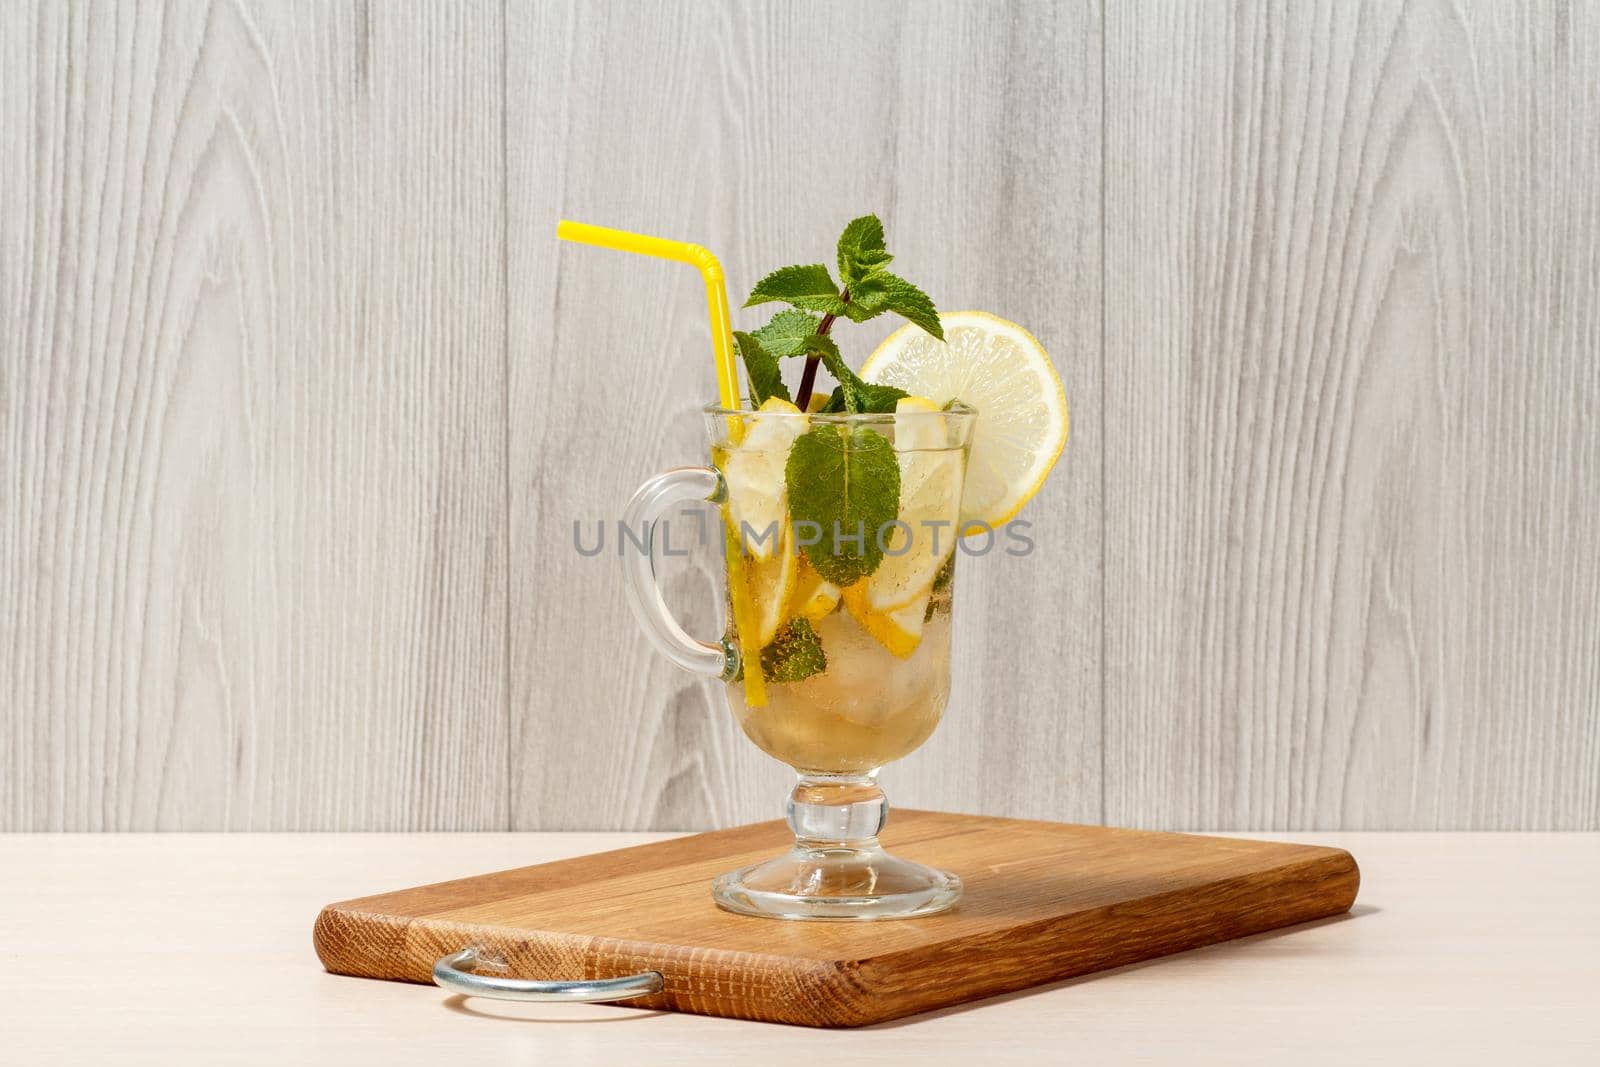 Carbonated lemonade with lemon slices and mint on an wooden cutting board, Cold beverage for hot summer day